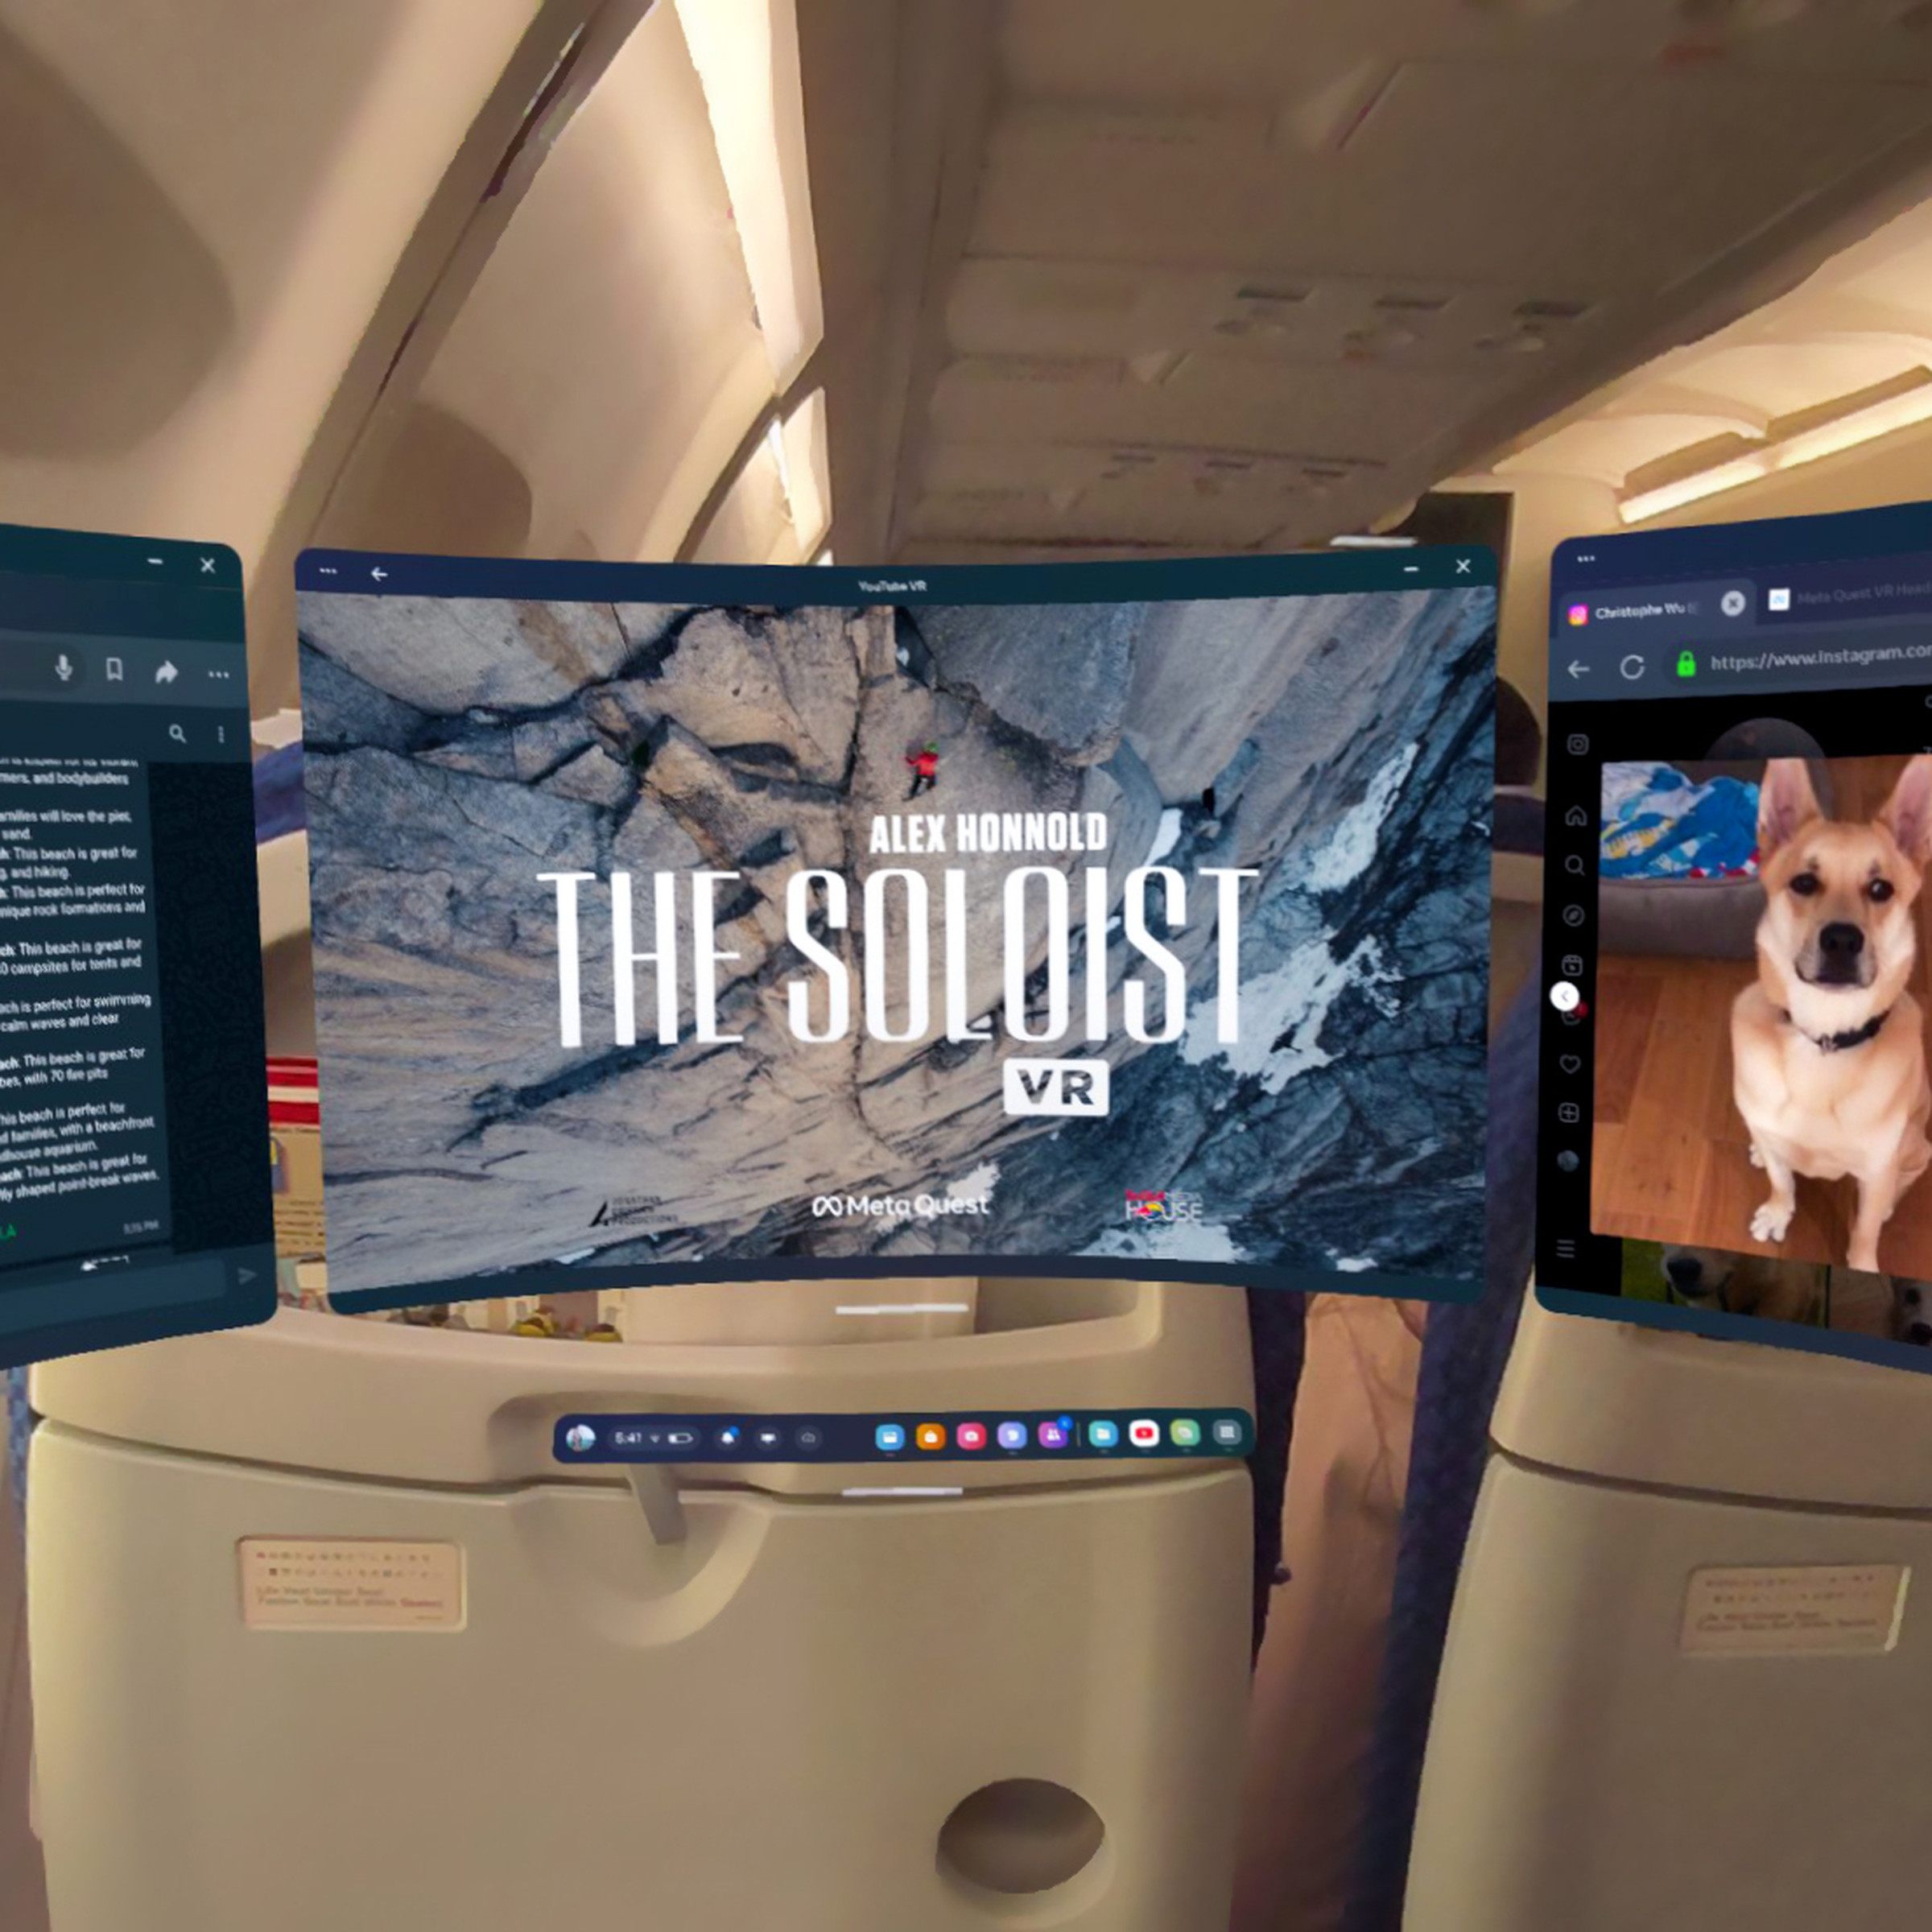 Three windows being used in Quest passthrough on an airplane.